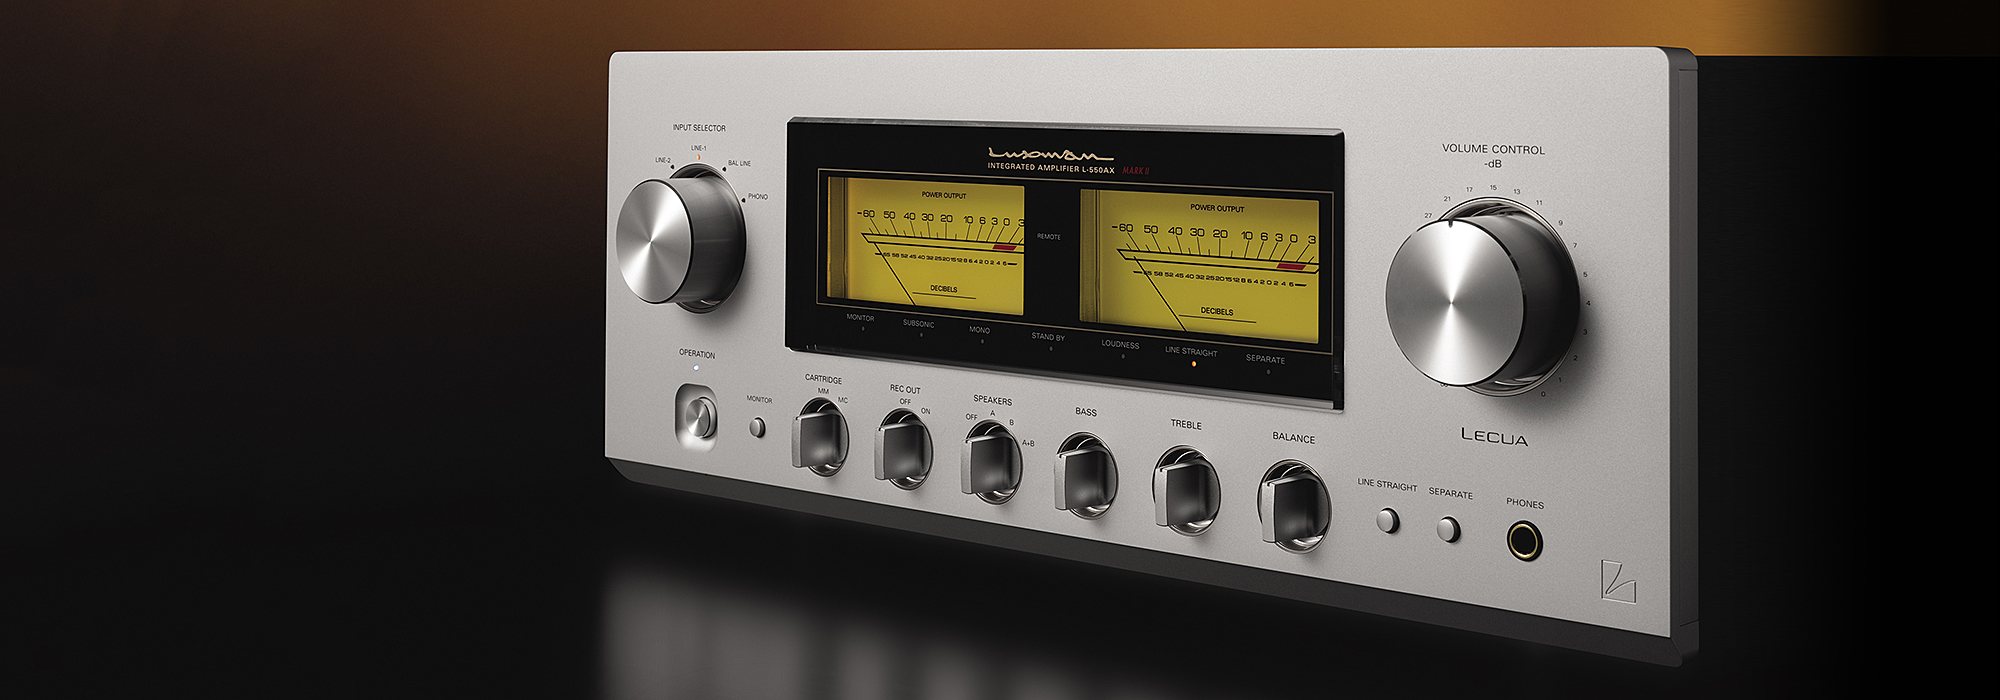 L-550AXII | INTEGRATED AMPLIFIERS | PRODUCTS | LUXMAN | Seeking 